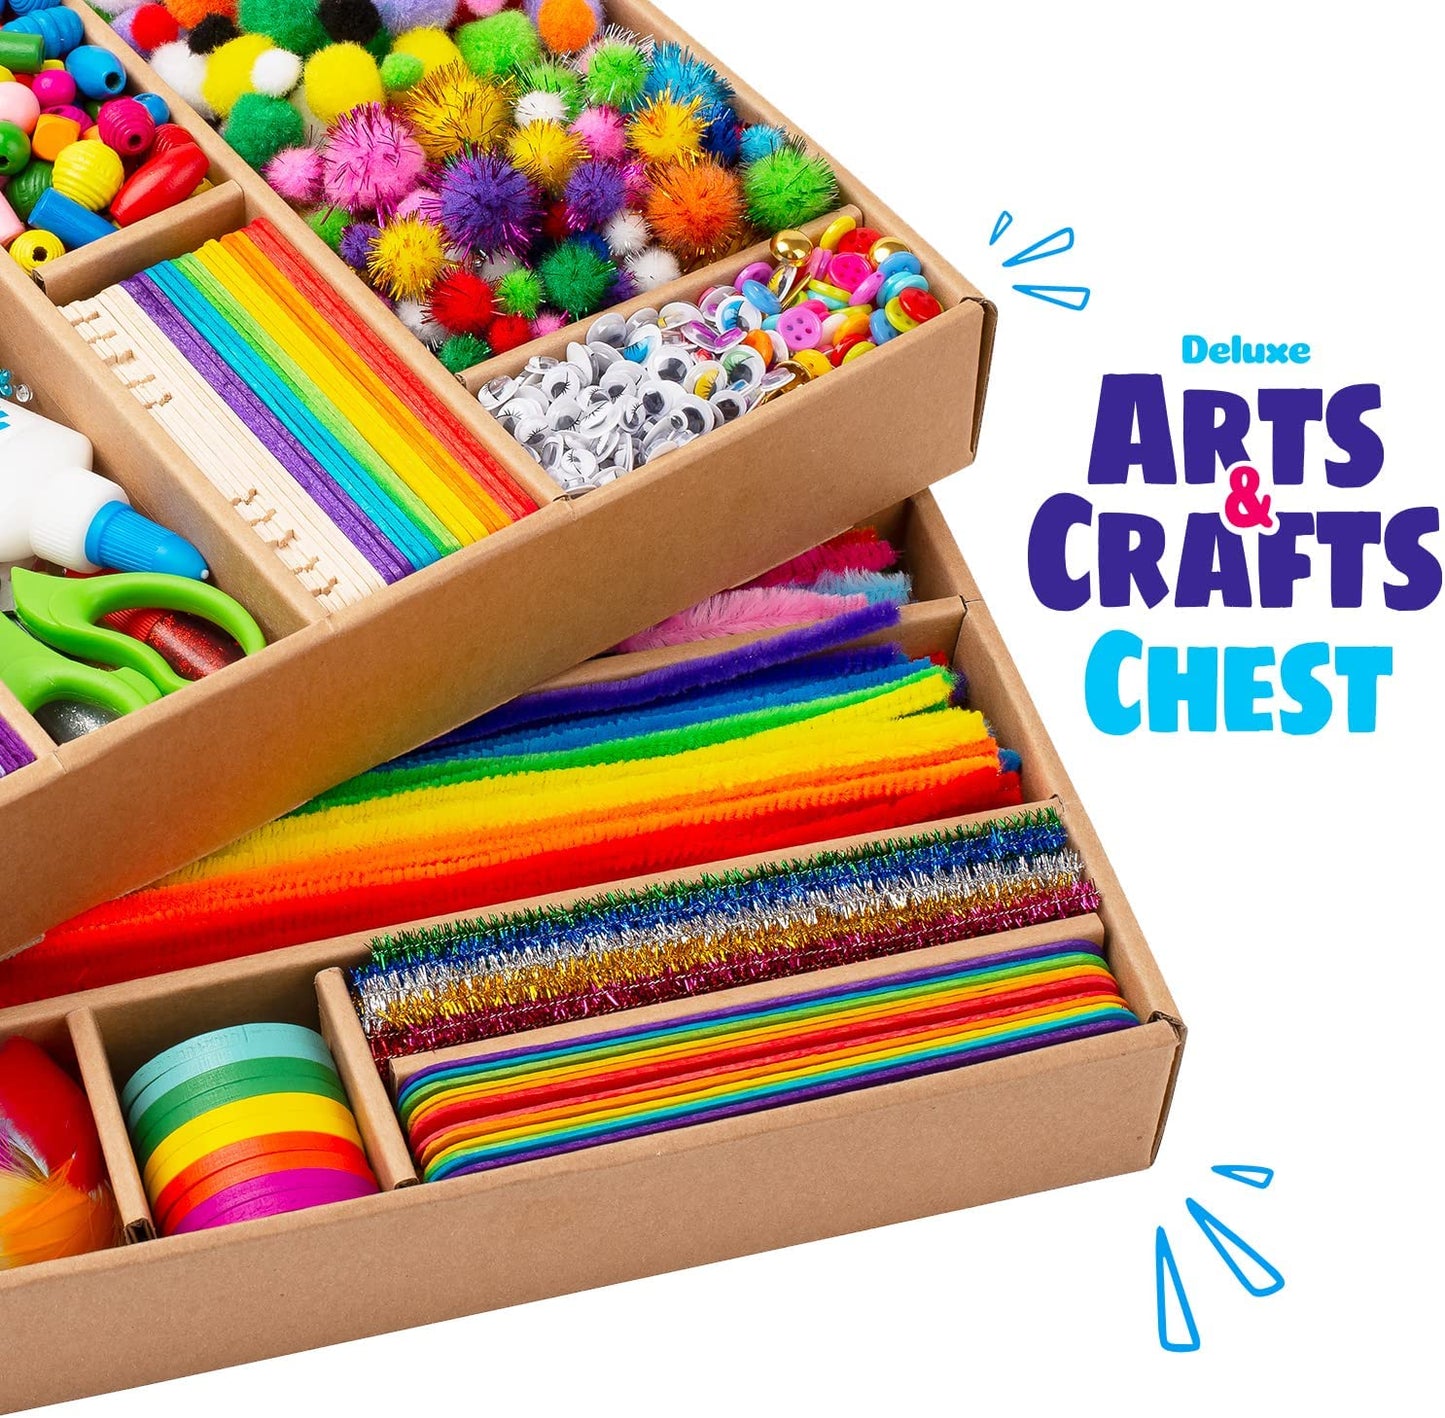 Craft Supplies for Kids - 3000+Pcs in the Ultimate Arts and Crafts Box - This Deluxe Art Supply Kit & Craft Set Is Perfect for Young Artists of Ages 4,5,6,7,8,9,10,11,12